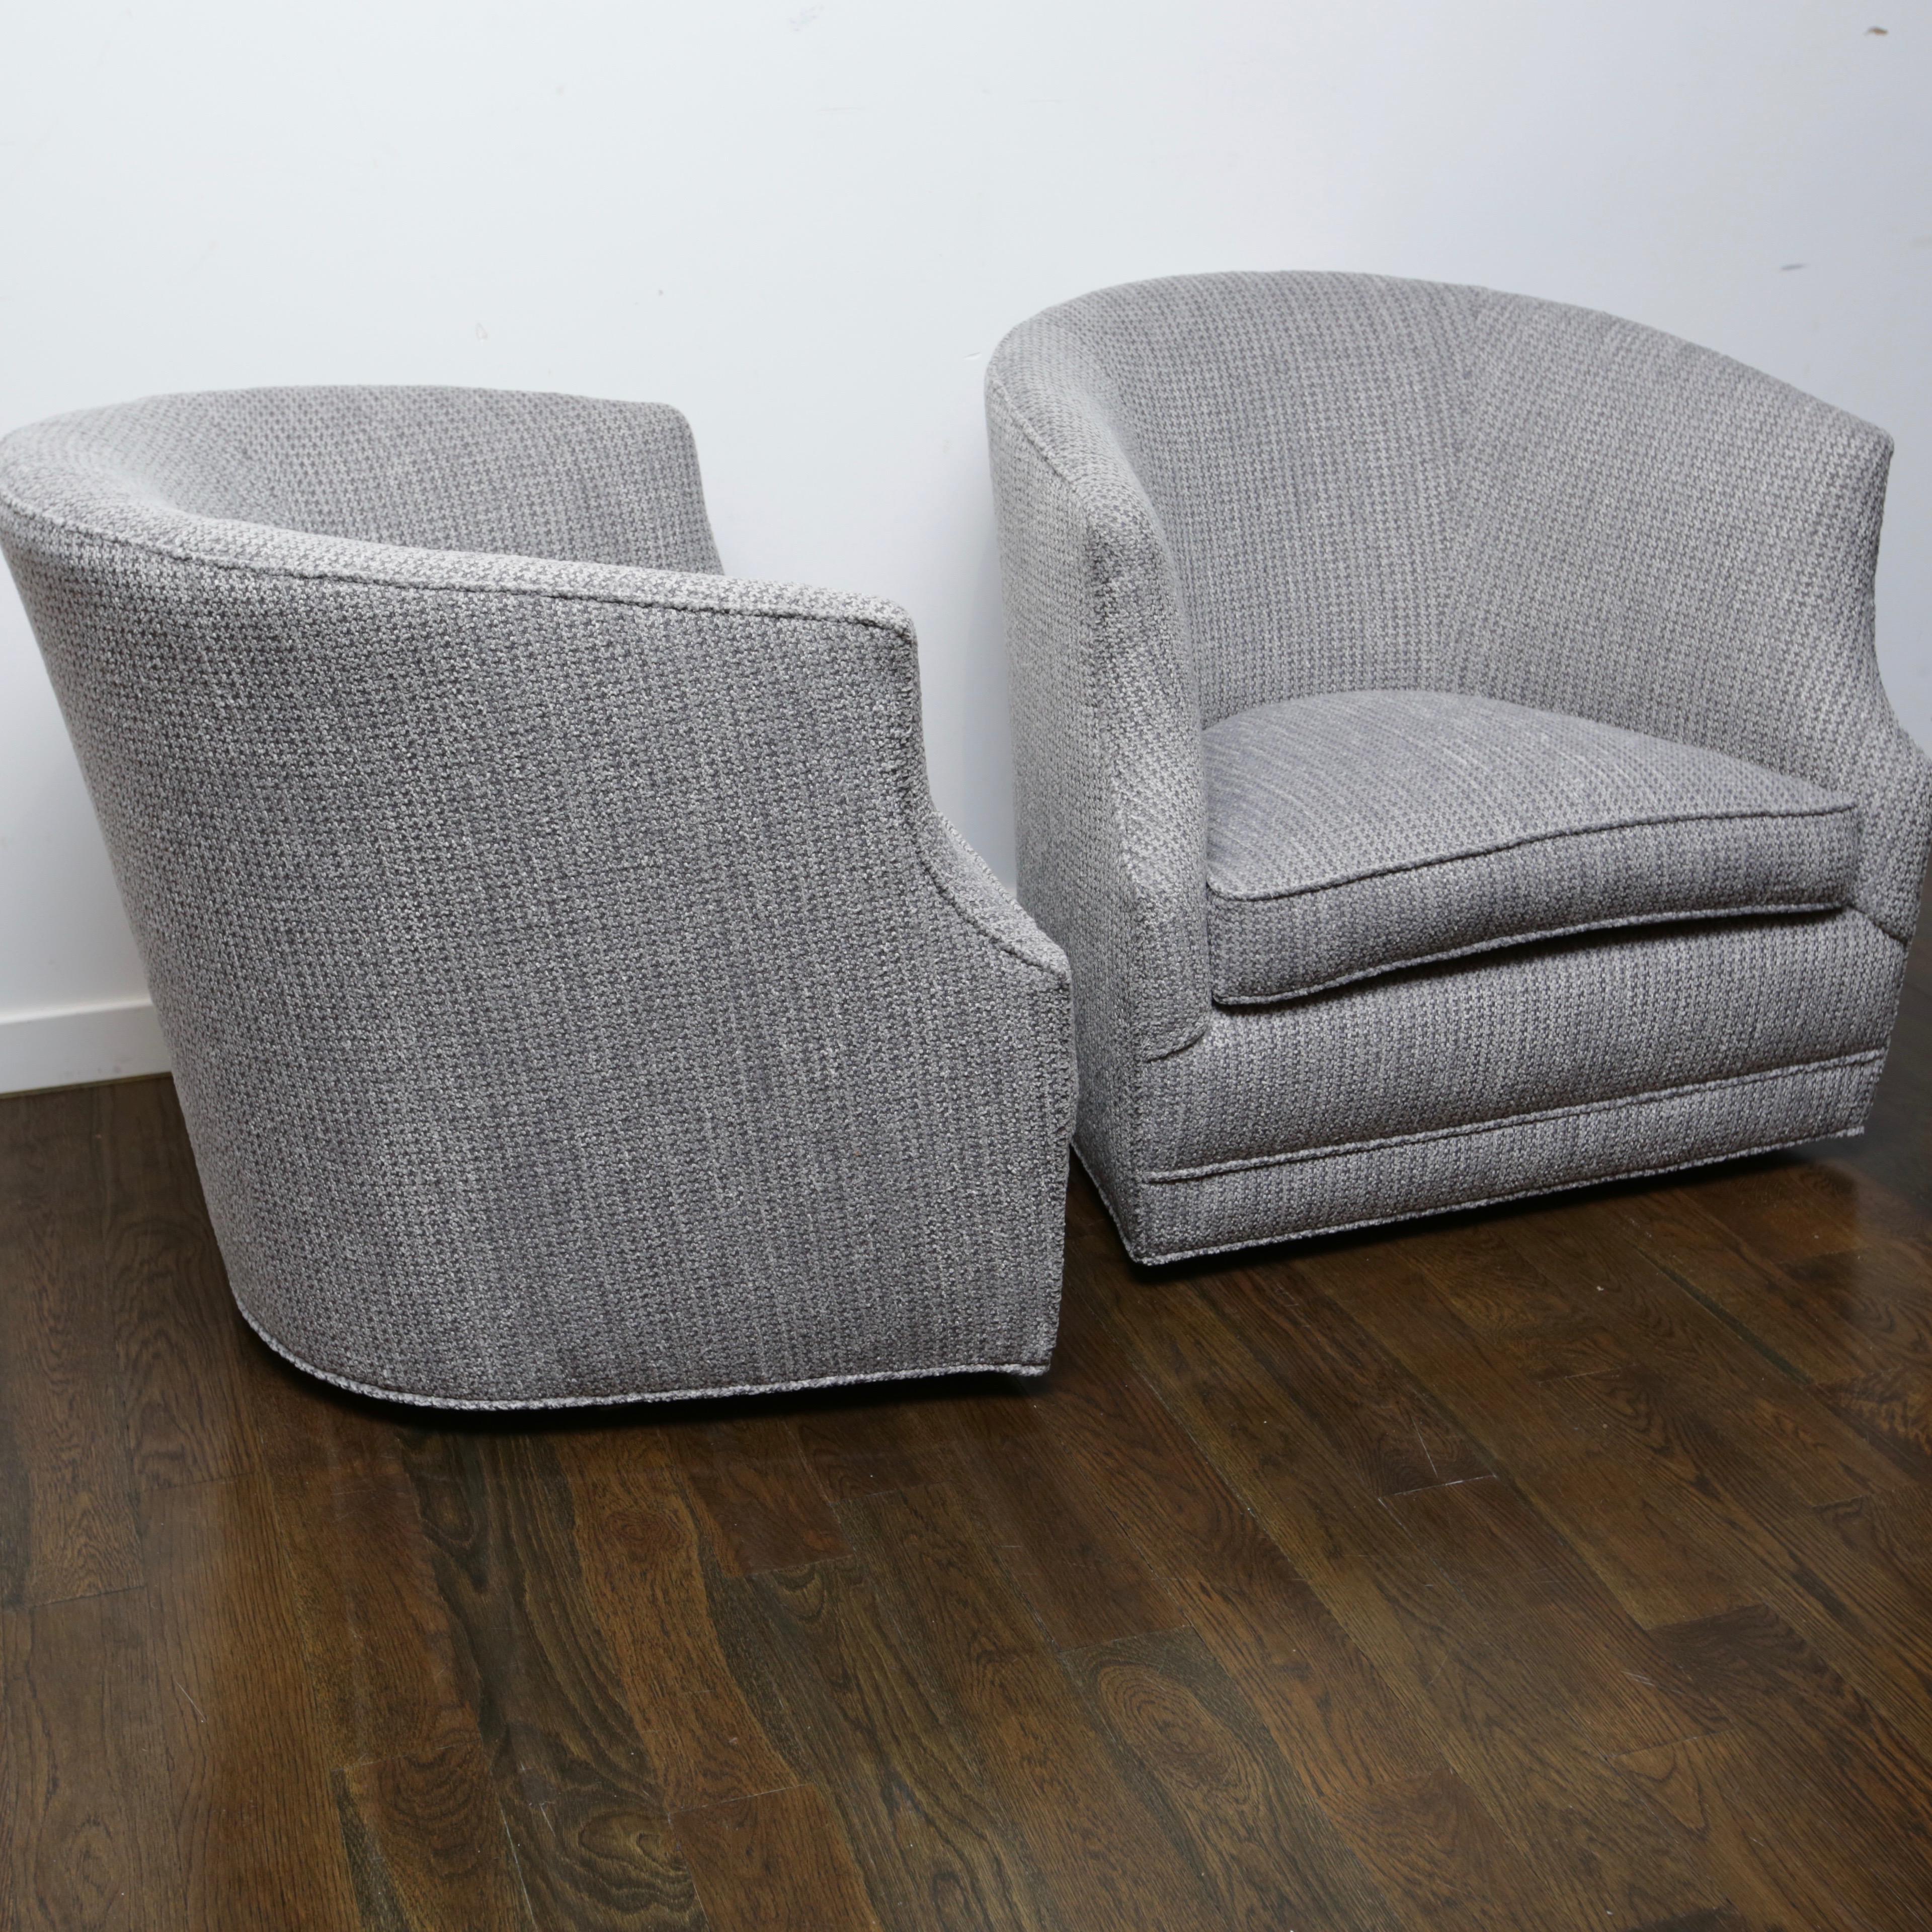 These swivel chairs have a unique, slightly higher than normal seat back. Just recovered in a soft, grey, hounds tooth pattered fabric.